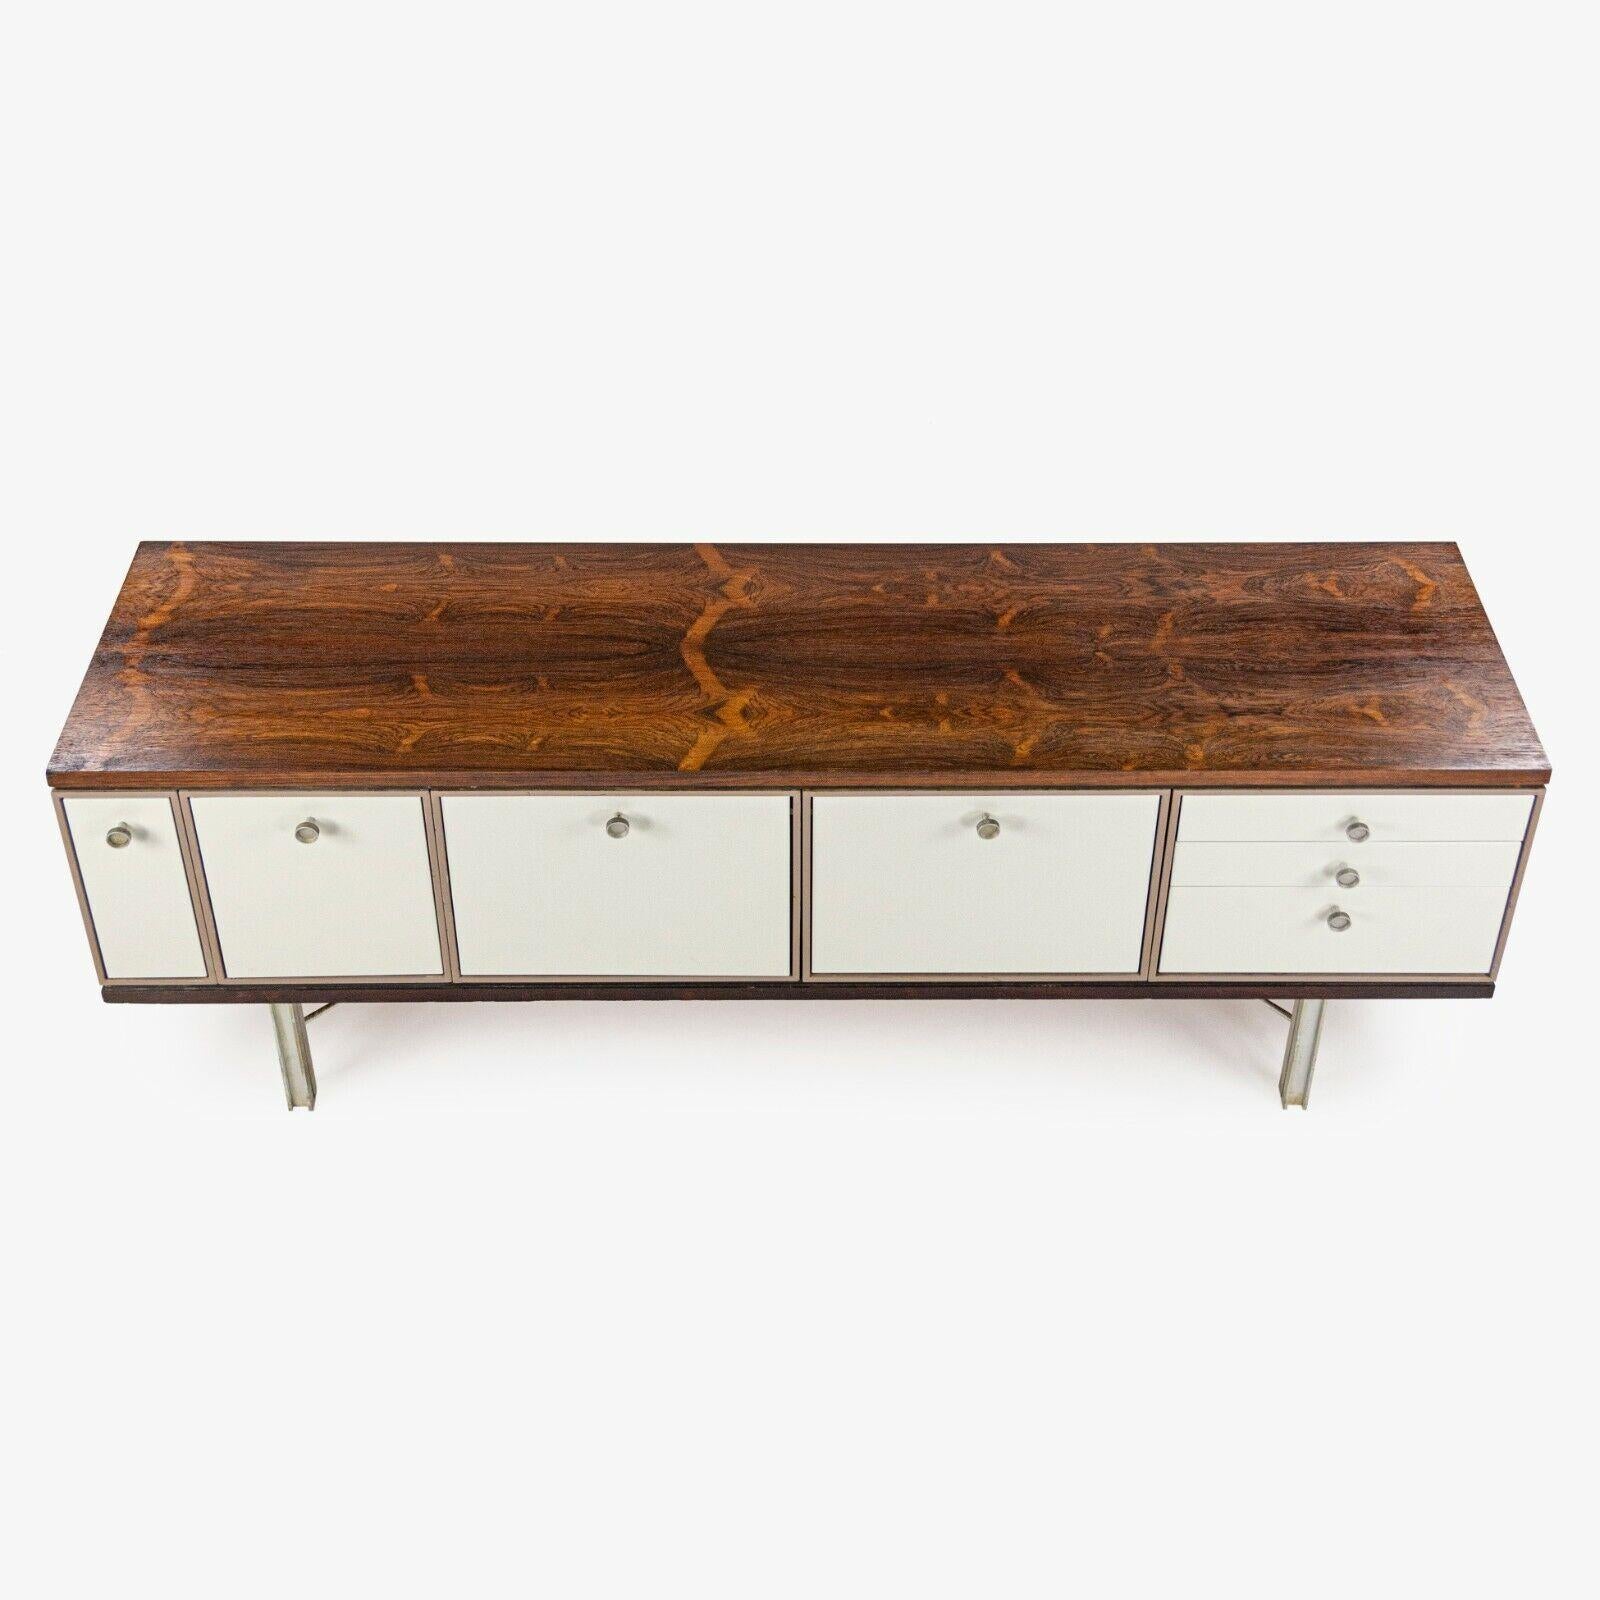 We present an absolutely exceptional and very rare Gerald Luss credenza, produced by the Lehigh Furniture Company circa 1960. This credenza is now famous for its misattribution to Charles and Ray Eames for the IBM Pavilion at the 1964 World's fair.